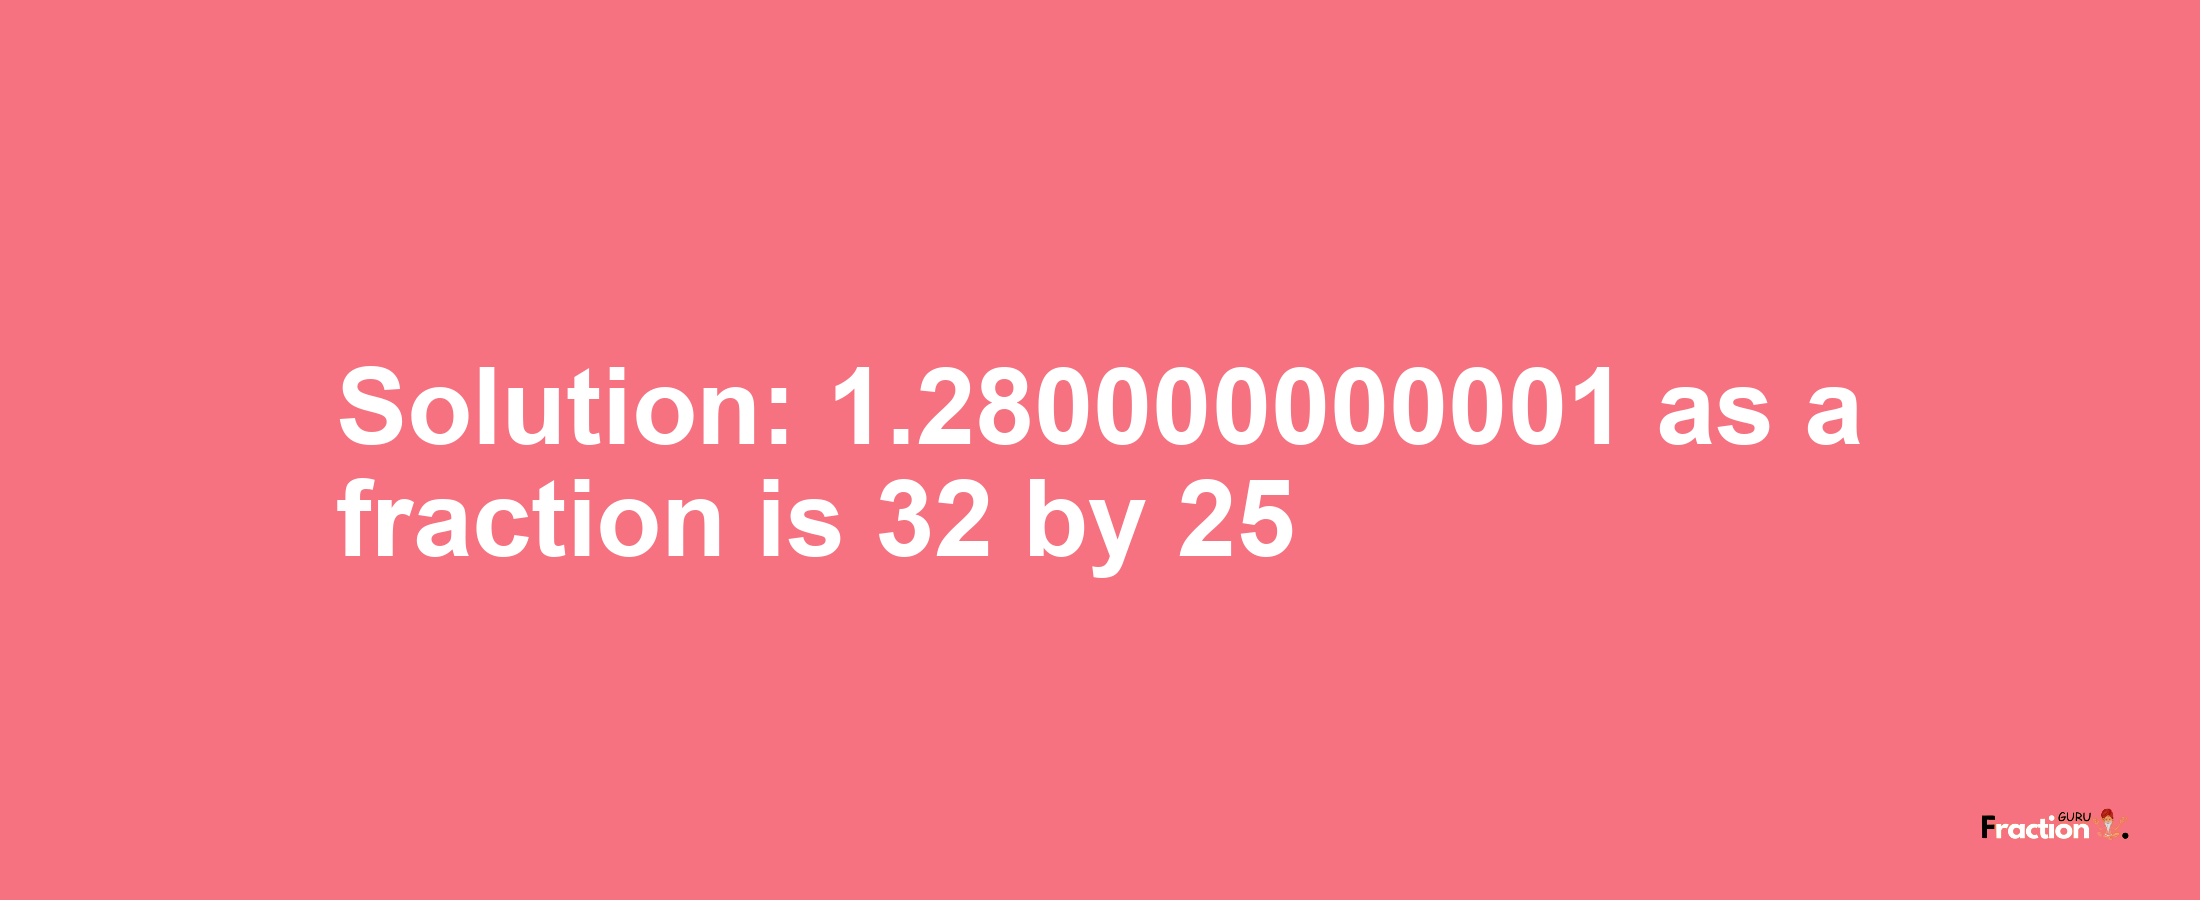 Solution:1.280000000001 as a fraction is 32/25